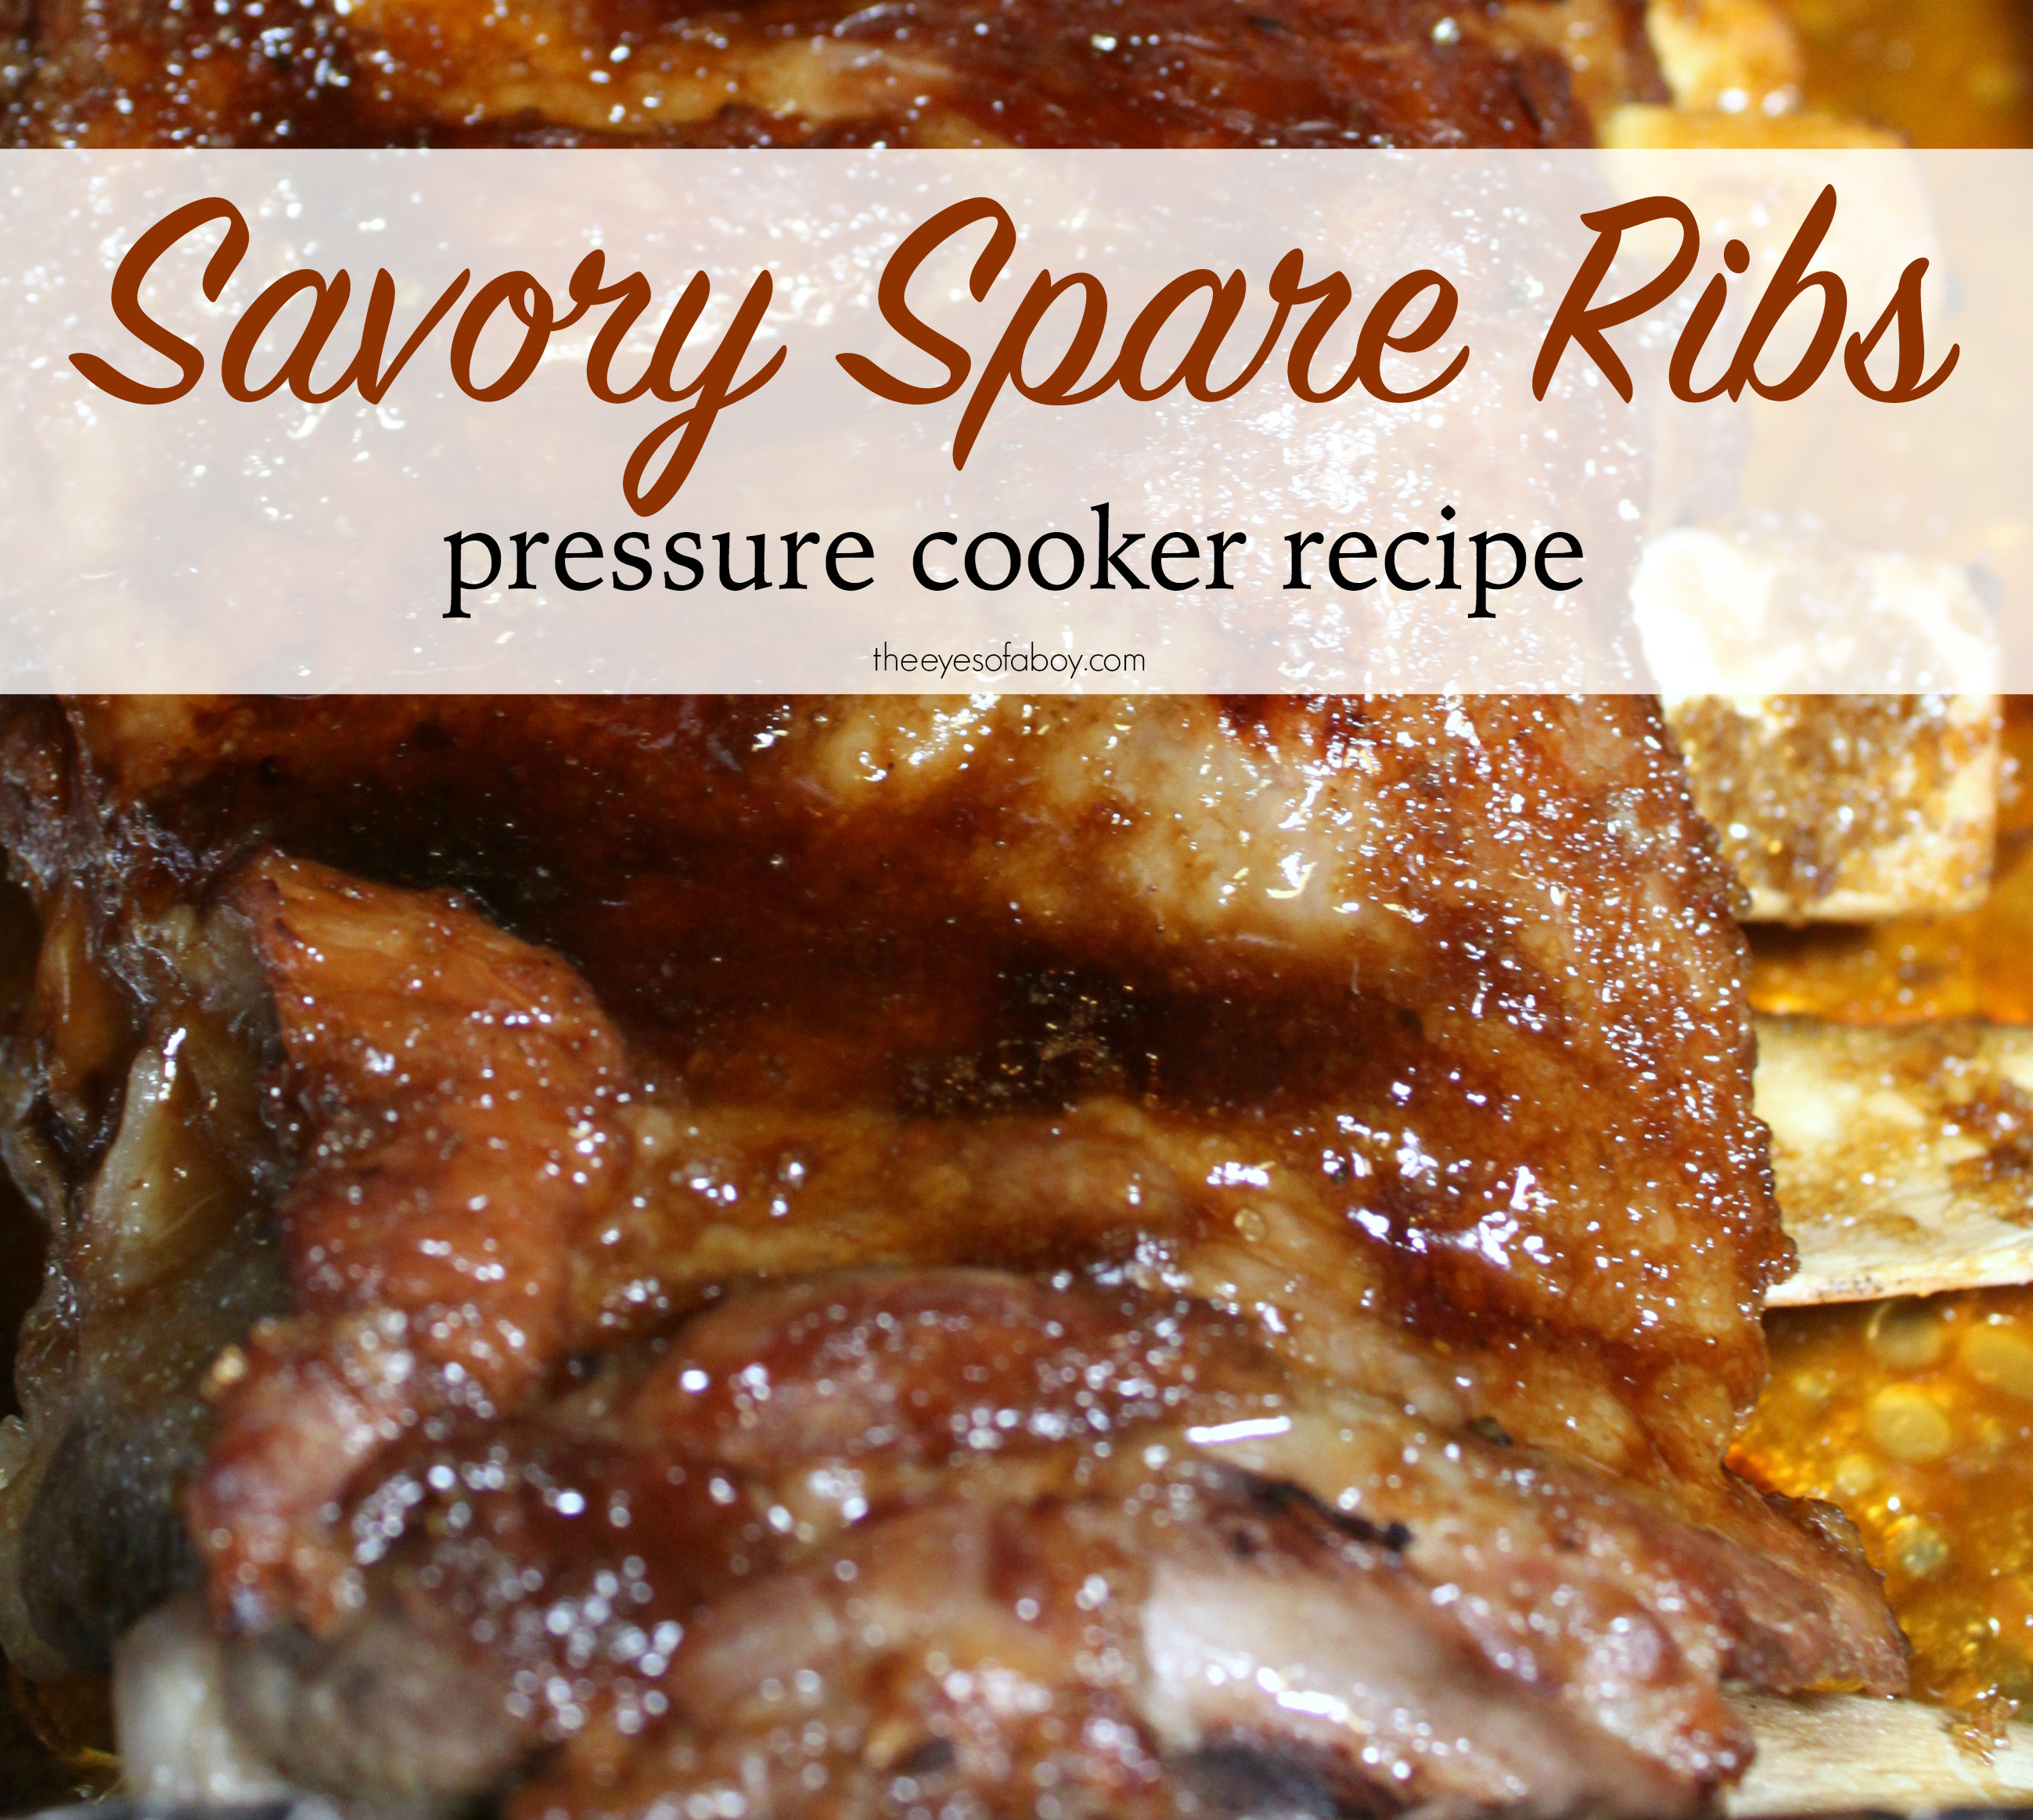 Pork Spare Ribs Recipe
 Savory Spare Ribs Pressure Cooker Recipe The Eyes of a Boy